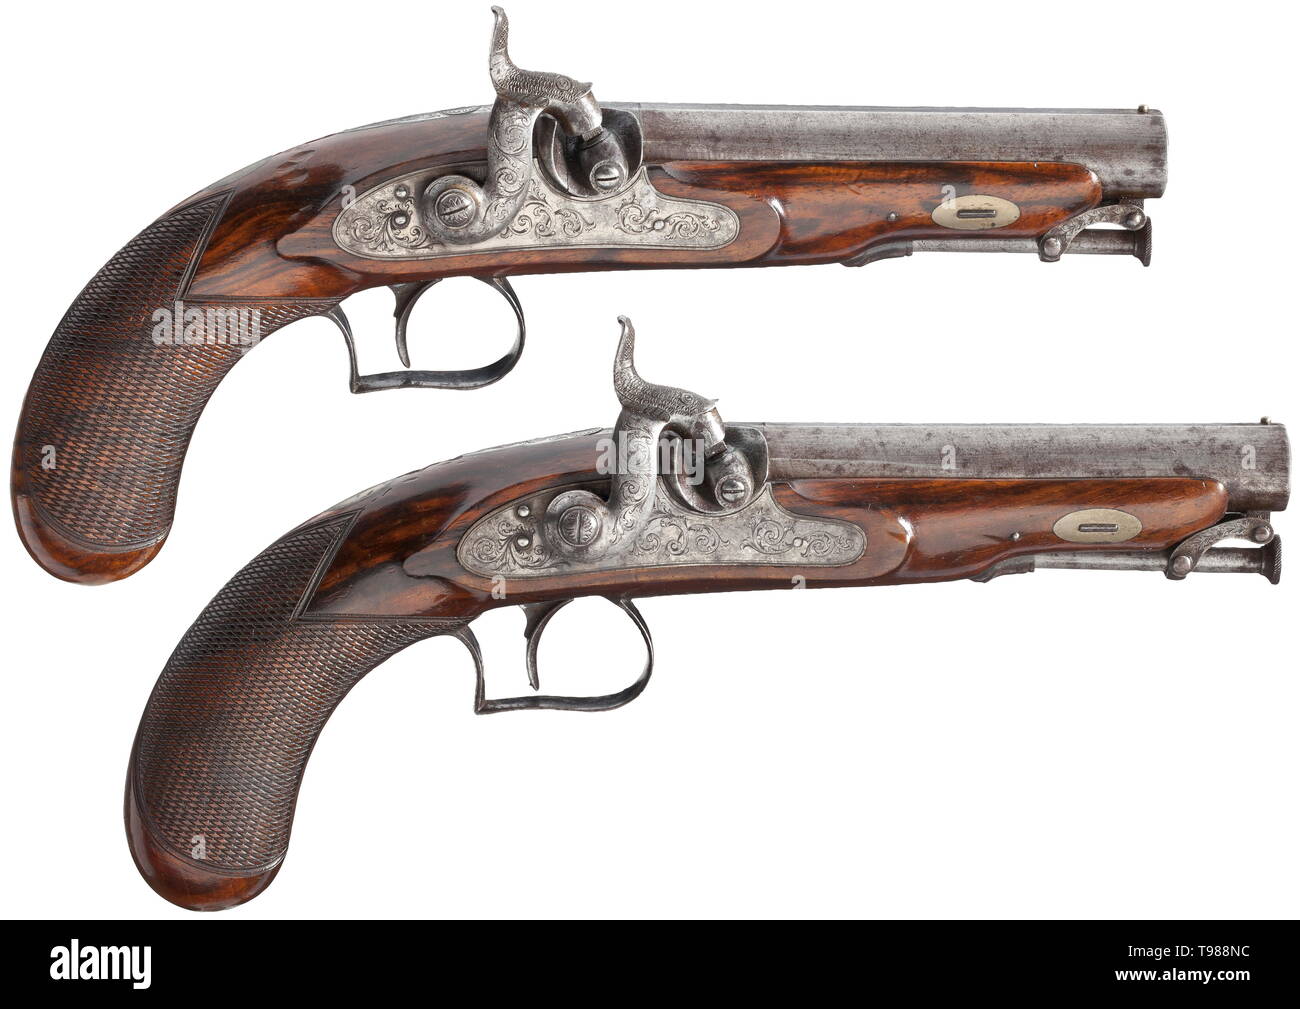 A pair of cased percussion pistols, a present to Constable John Boulton, Birmingham, 1839 Rifled barrels with flattened tops in 12.5 mm calibre, bores with good groove/land profile, engraved and decorated with gold band inlays over the chamber, the barrel tops featuring the owner's name. Percussion locks engraved with fine scrolling leaves. Beautifully grained walnut stocks with remains of bluing and en suite engraved iron furniture. Hinged ramrods. Length 24.5 cm. In slightly faded and rubbed, purple velvet-lined ma 19th century, Additional-Rights-Clearance-Info-Not-Available Stock Photo